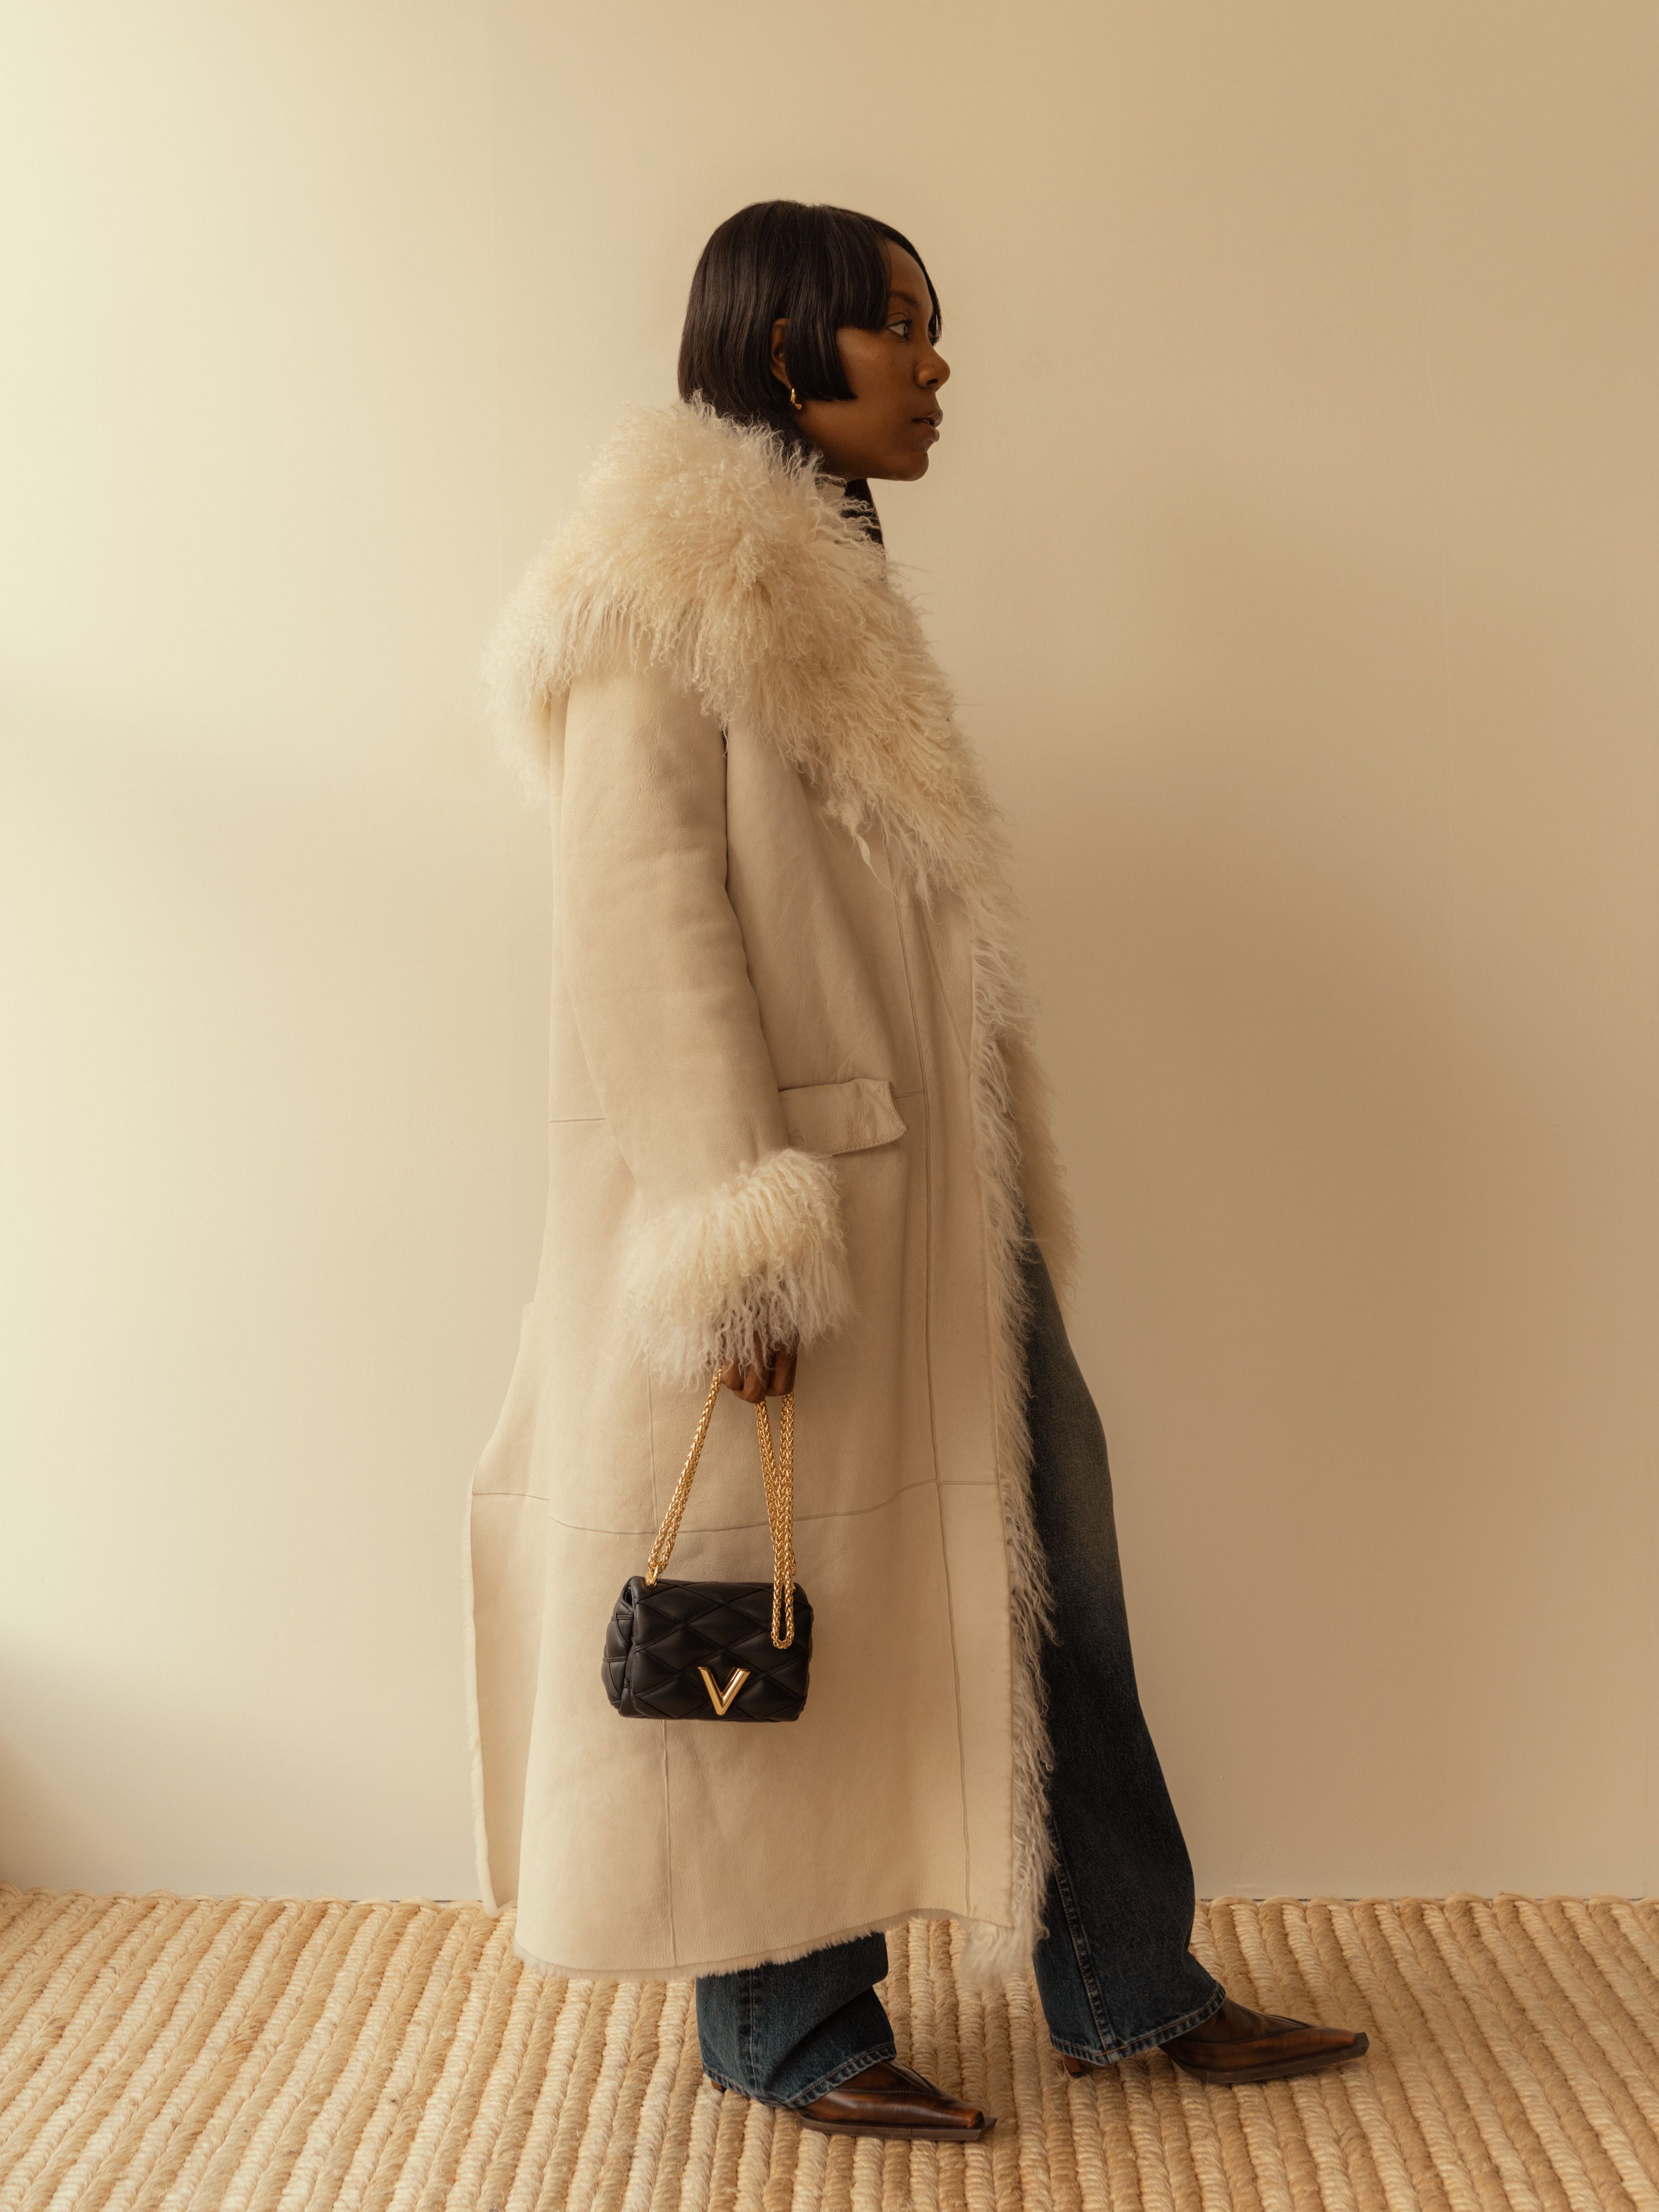 How to Style a Big Fluffy Coat